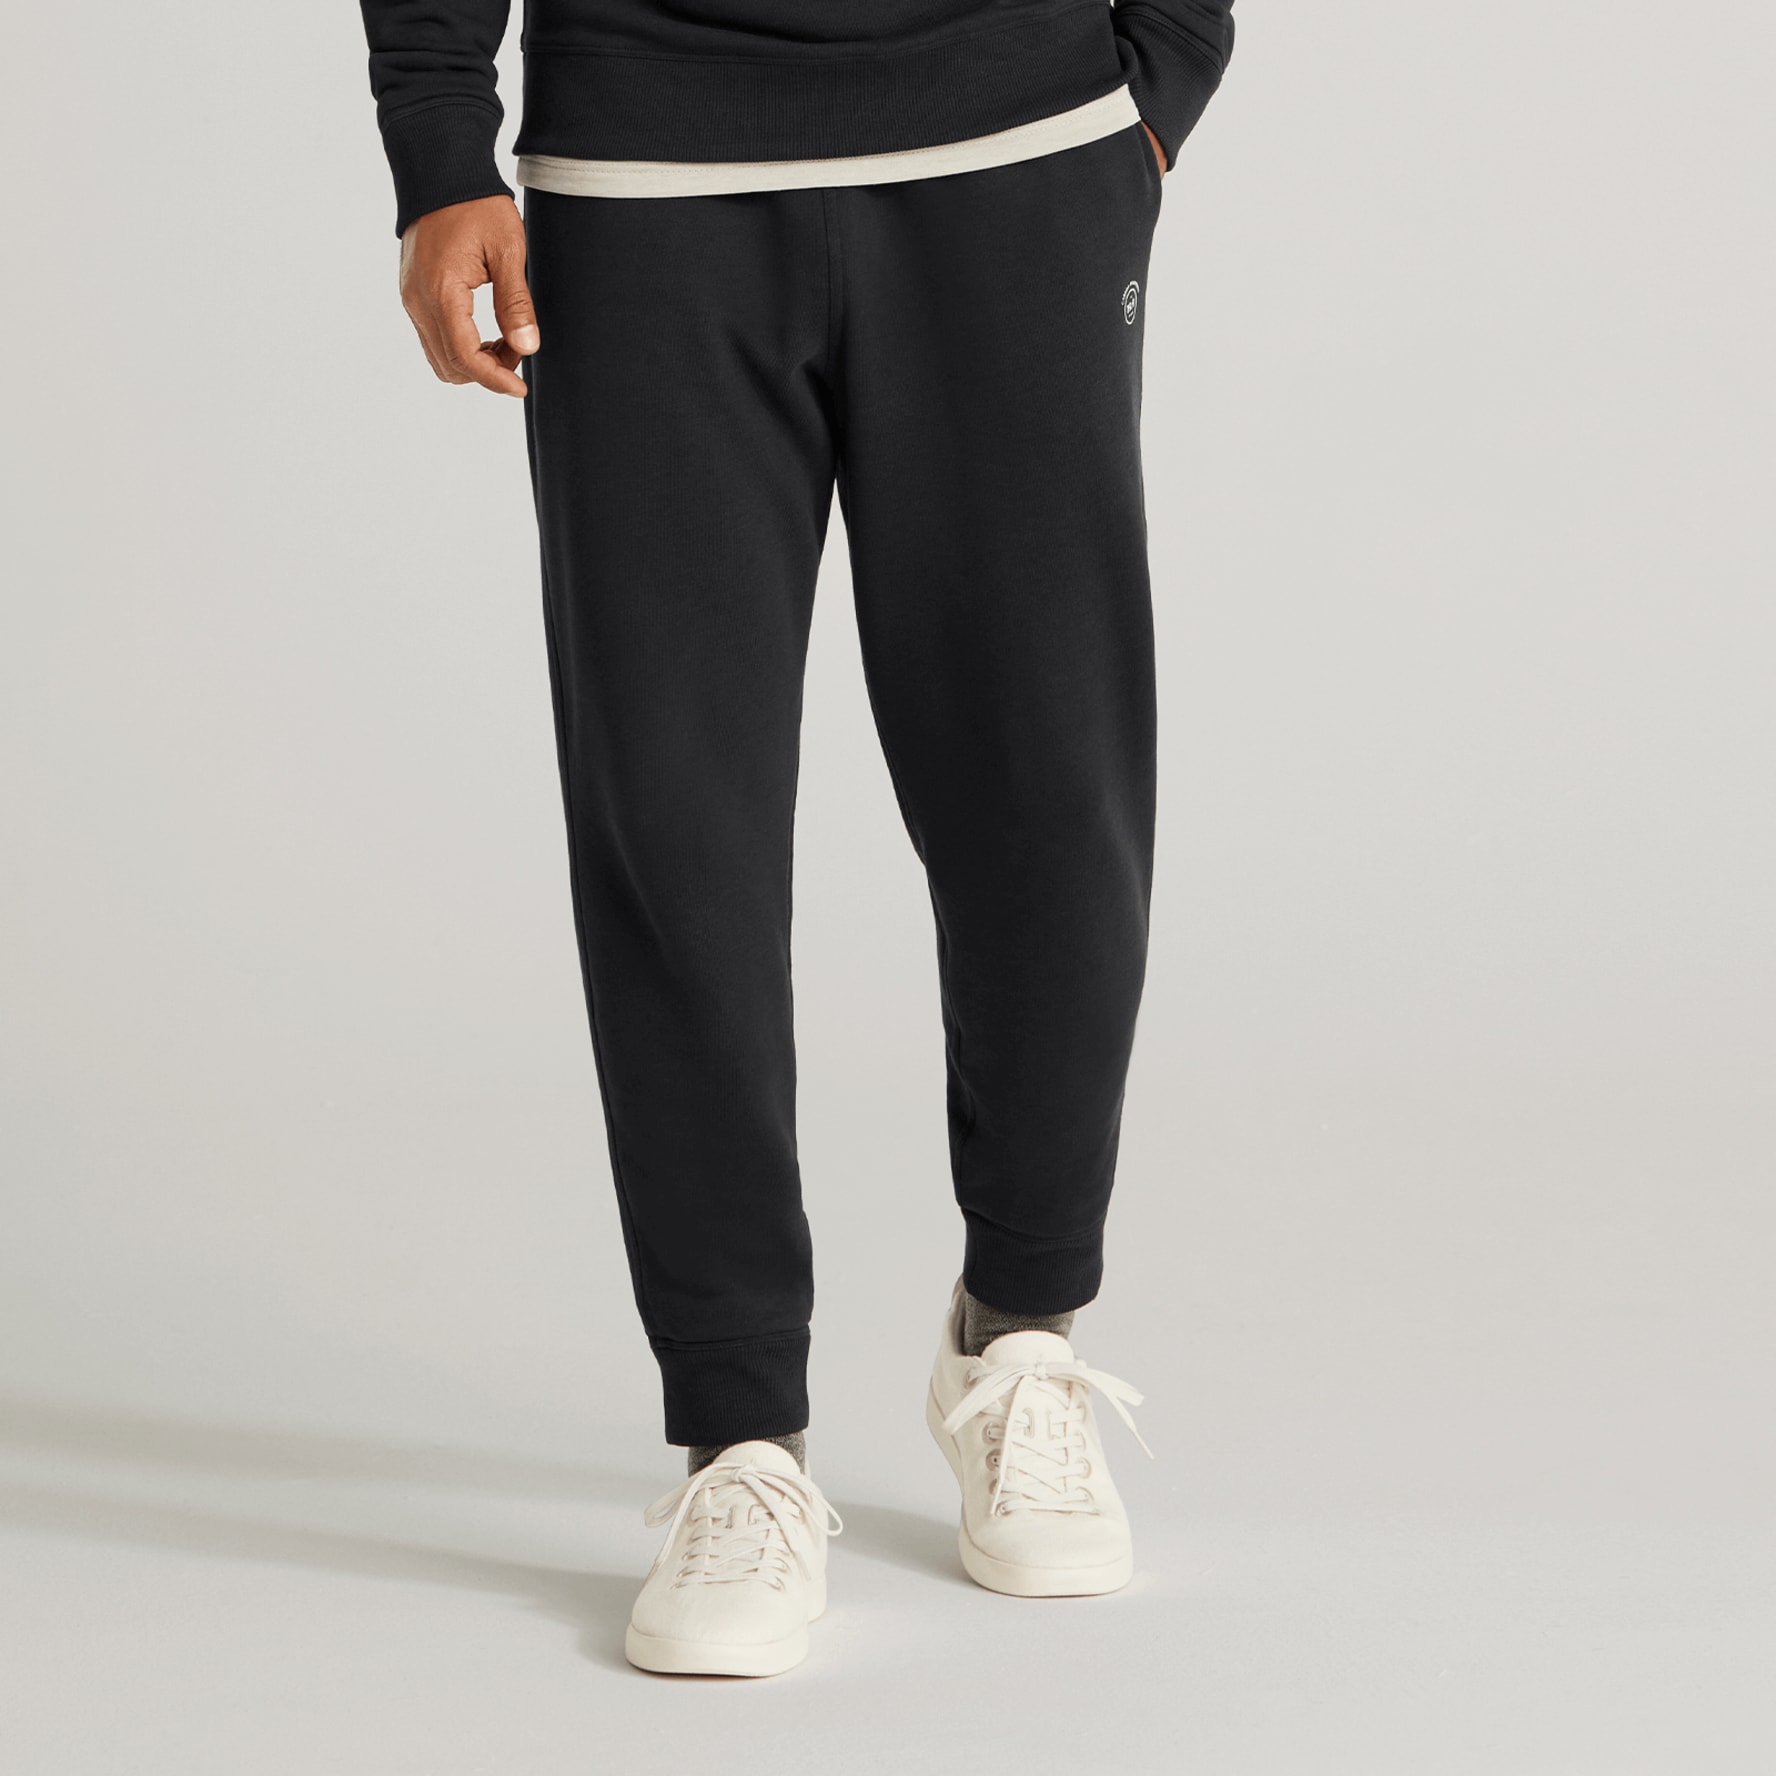 Cropped sweat pants with 30% discount!